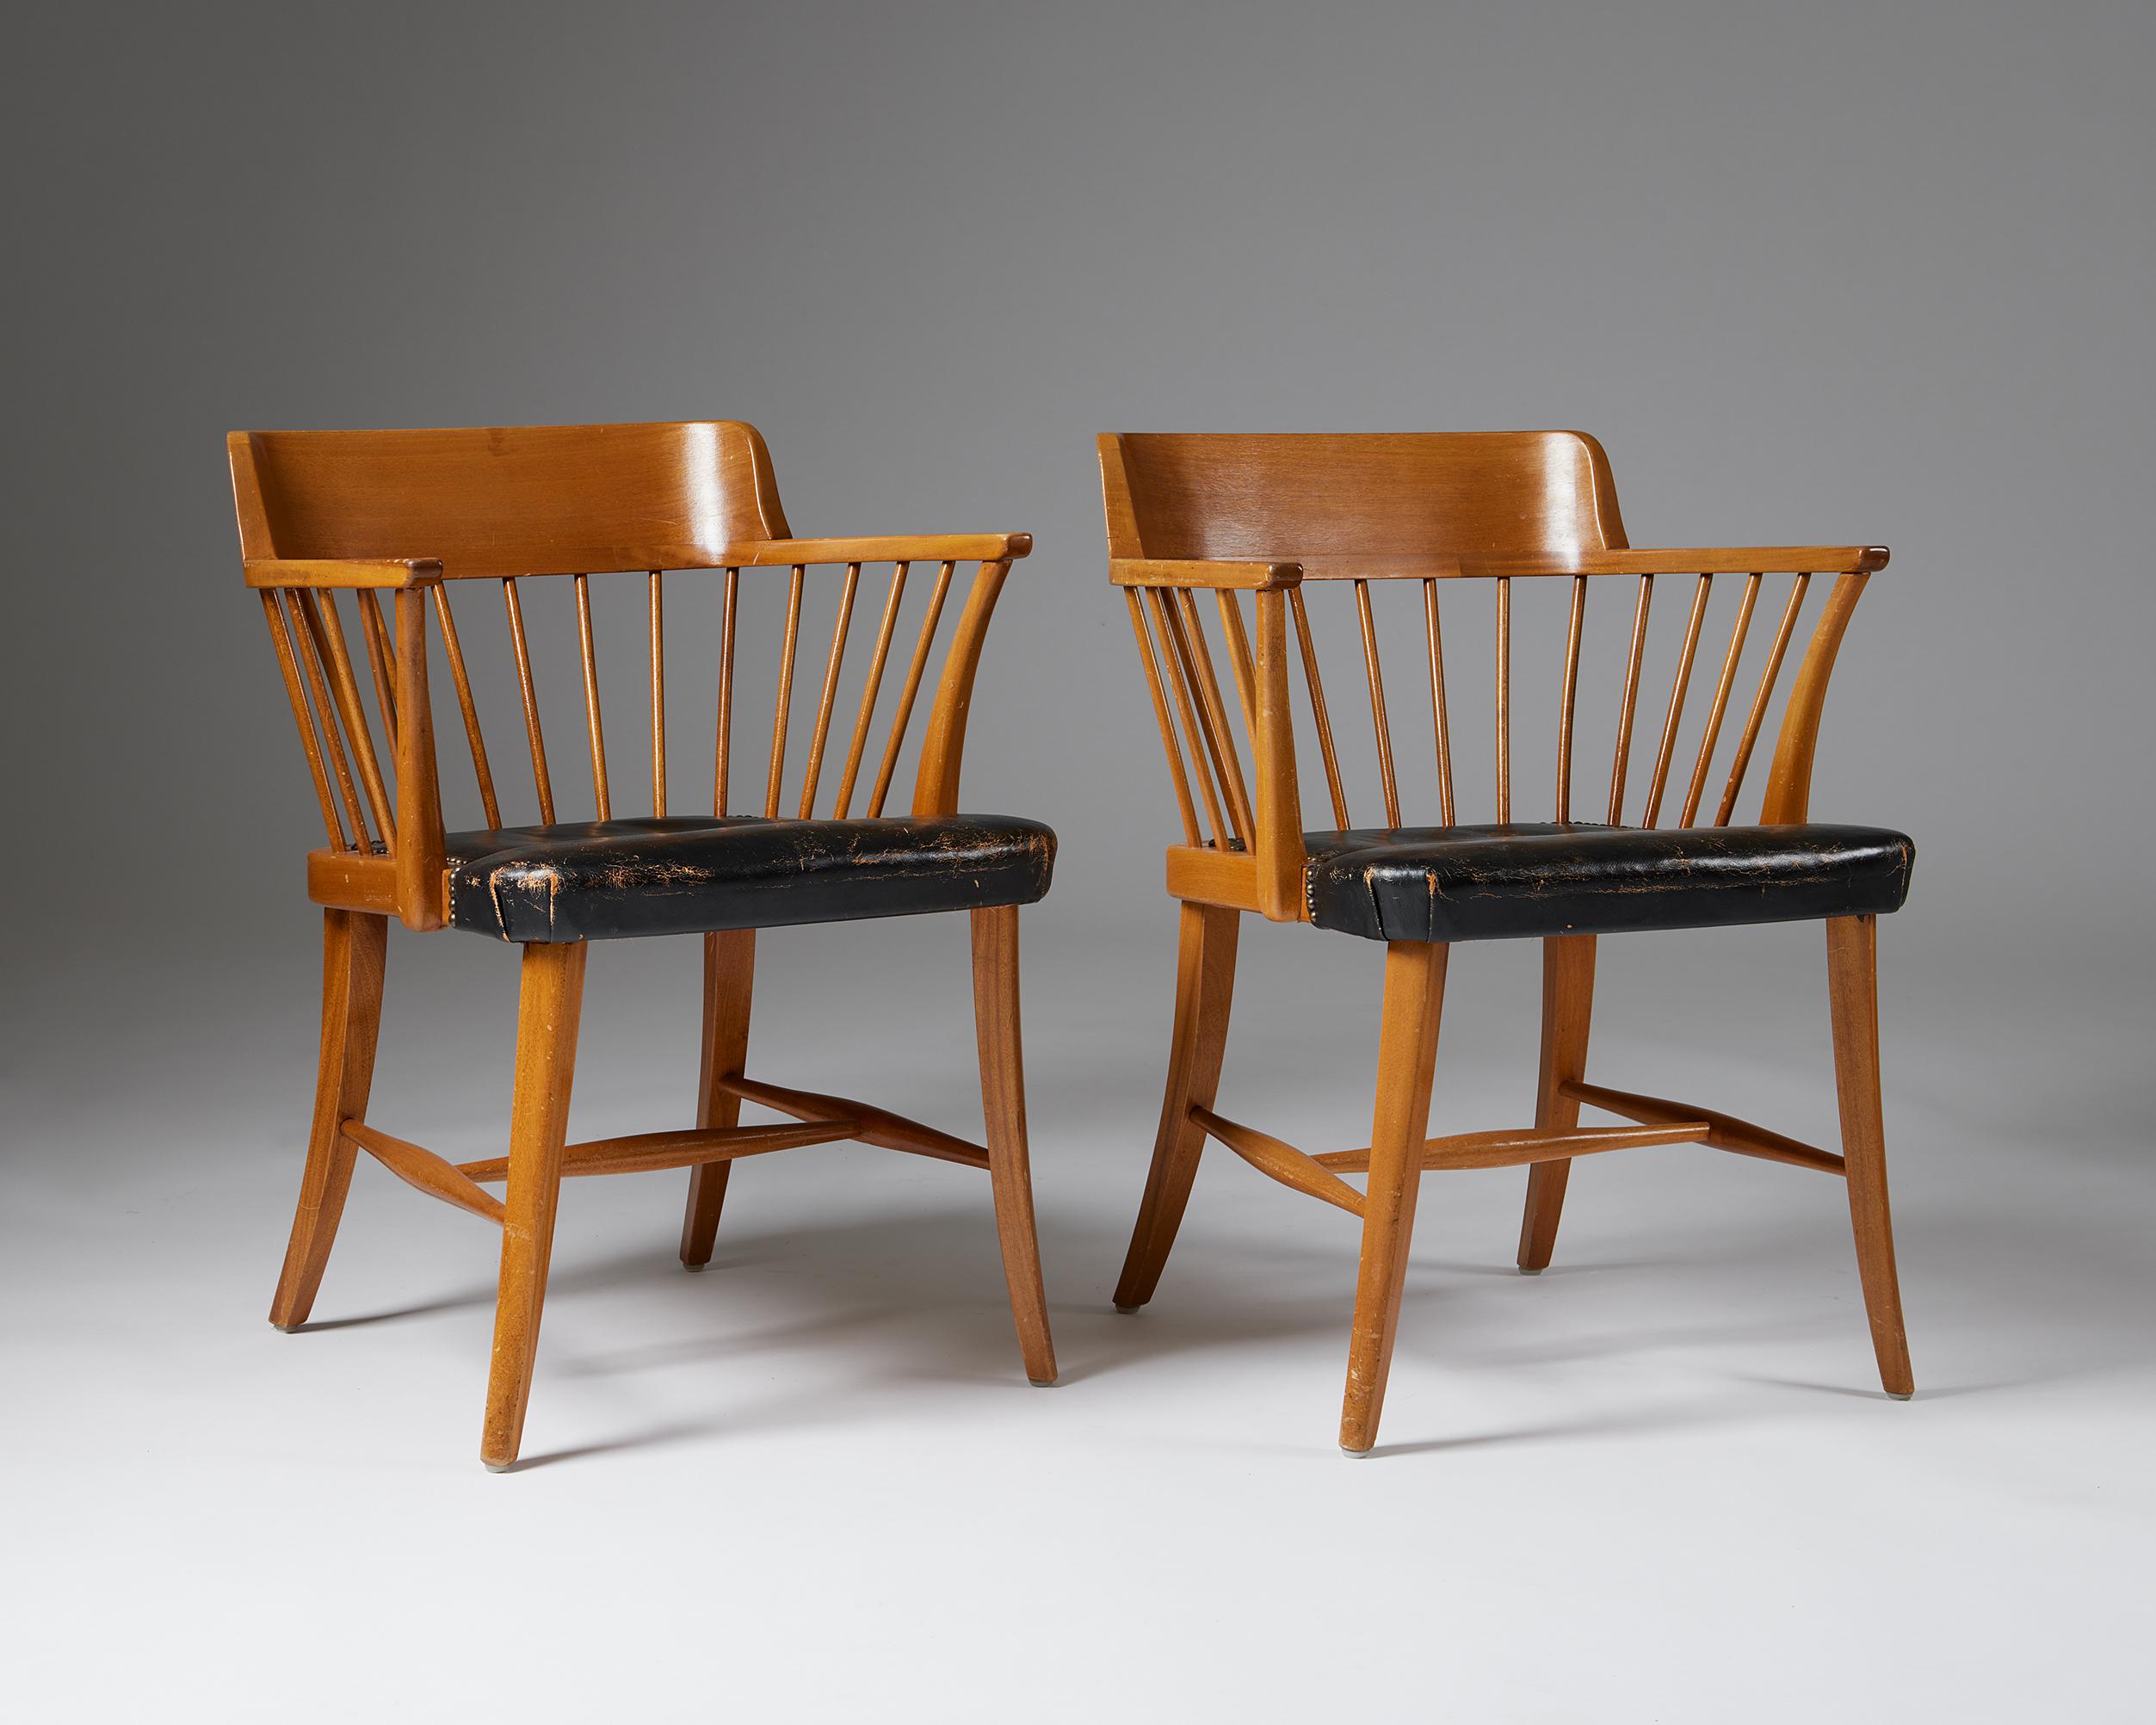 Pair of armchairs model 789B ‘Captain’s Chair’ designed by Josef Frank for Svenskt Tenn,
Sweden. 1938.

Mahogany, leather and brass.

Dimensions:
H: 76.5 cm / 2' 6